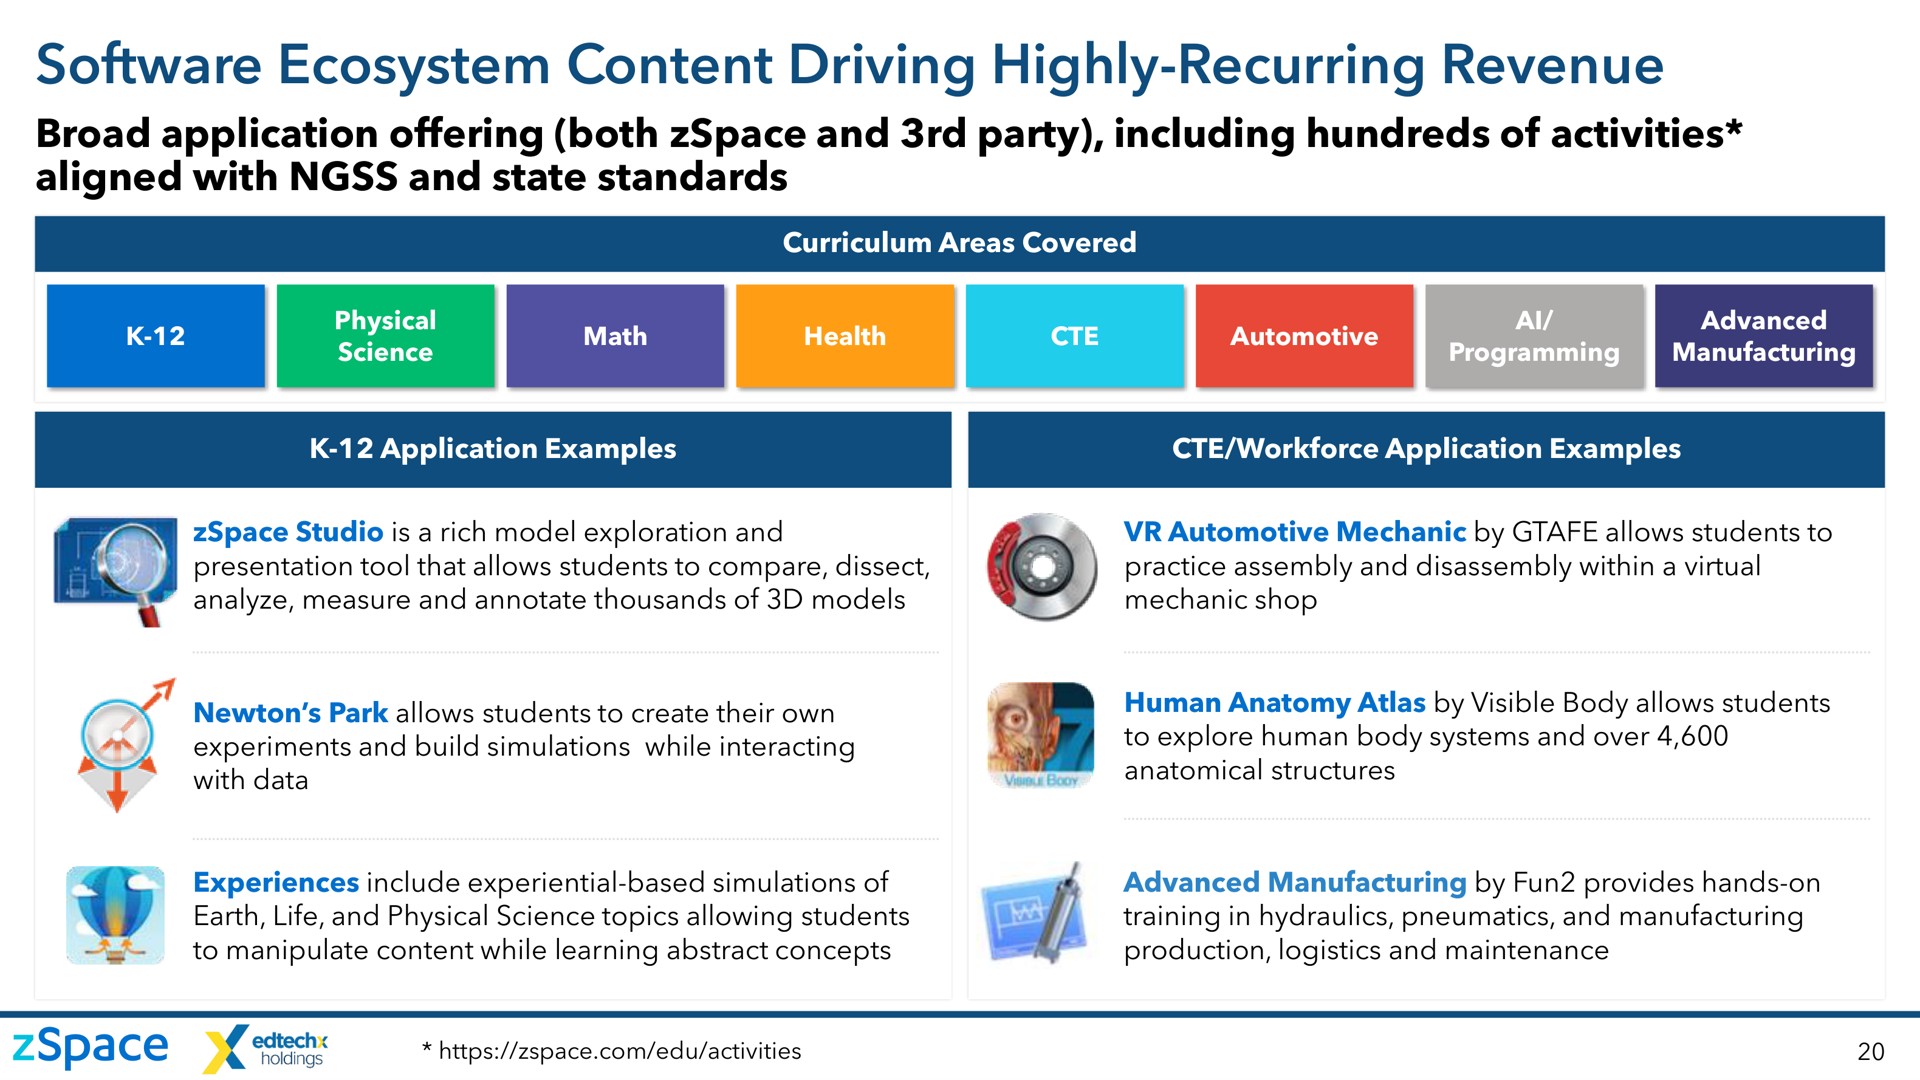 ecosystem content driving highly recurring revenue | zSpace